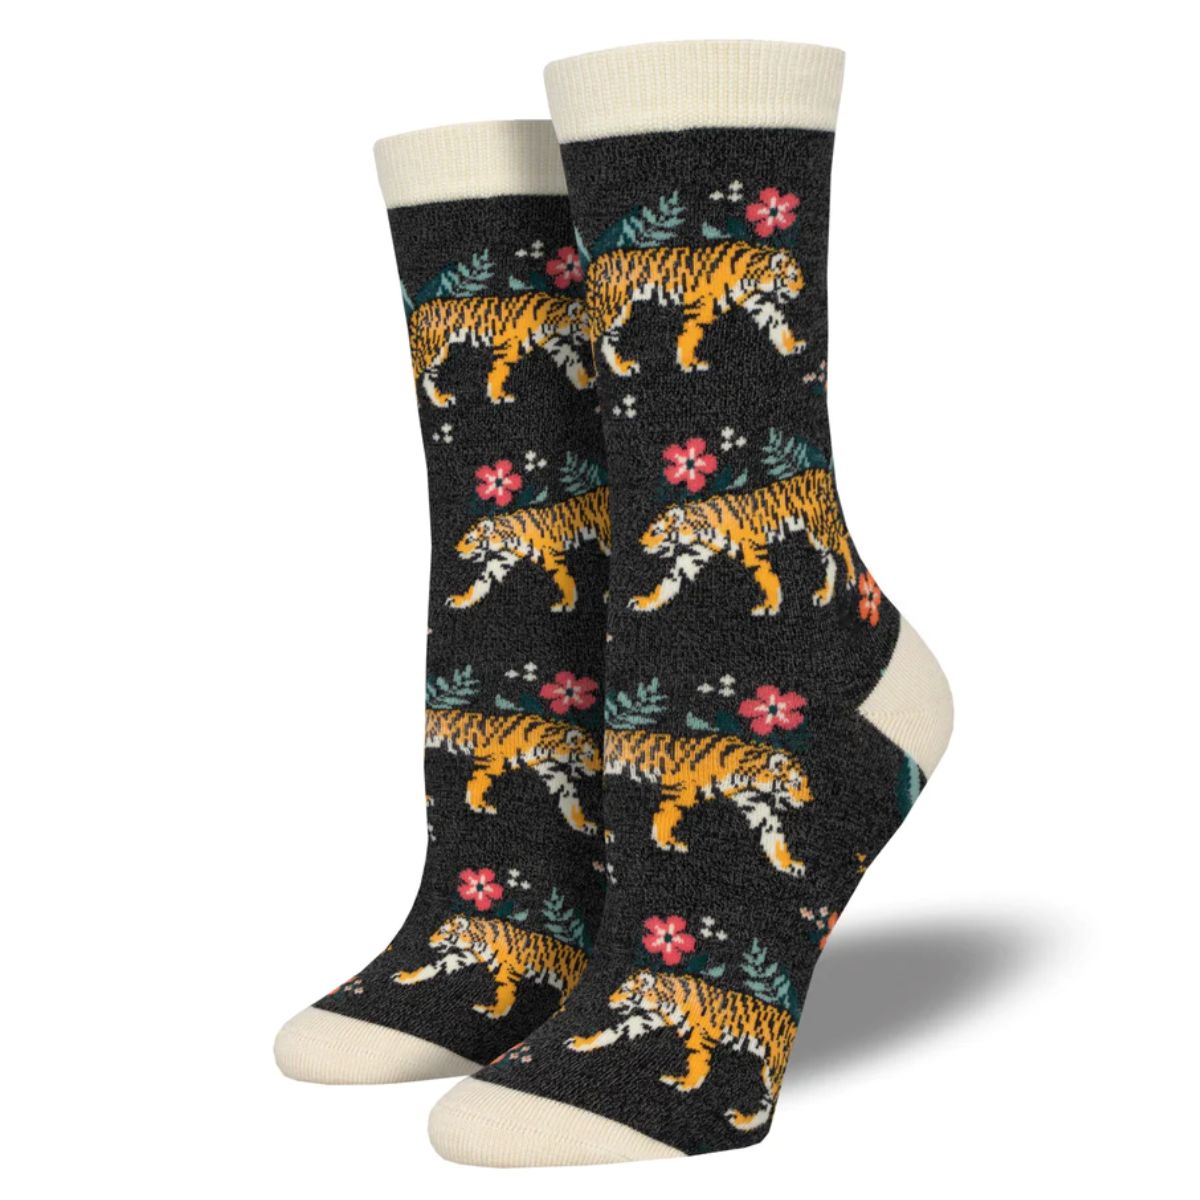 Tiger florals socks a pair of black crew socks with tiger and flower print